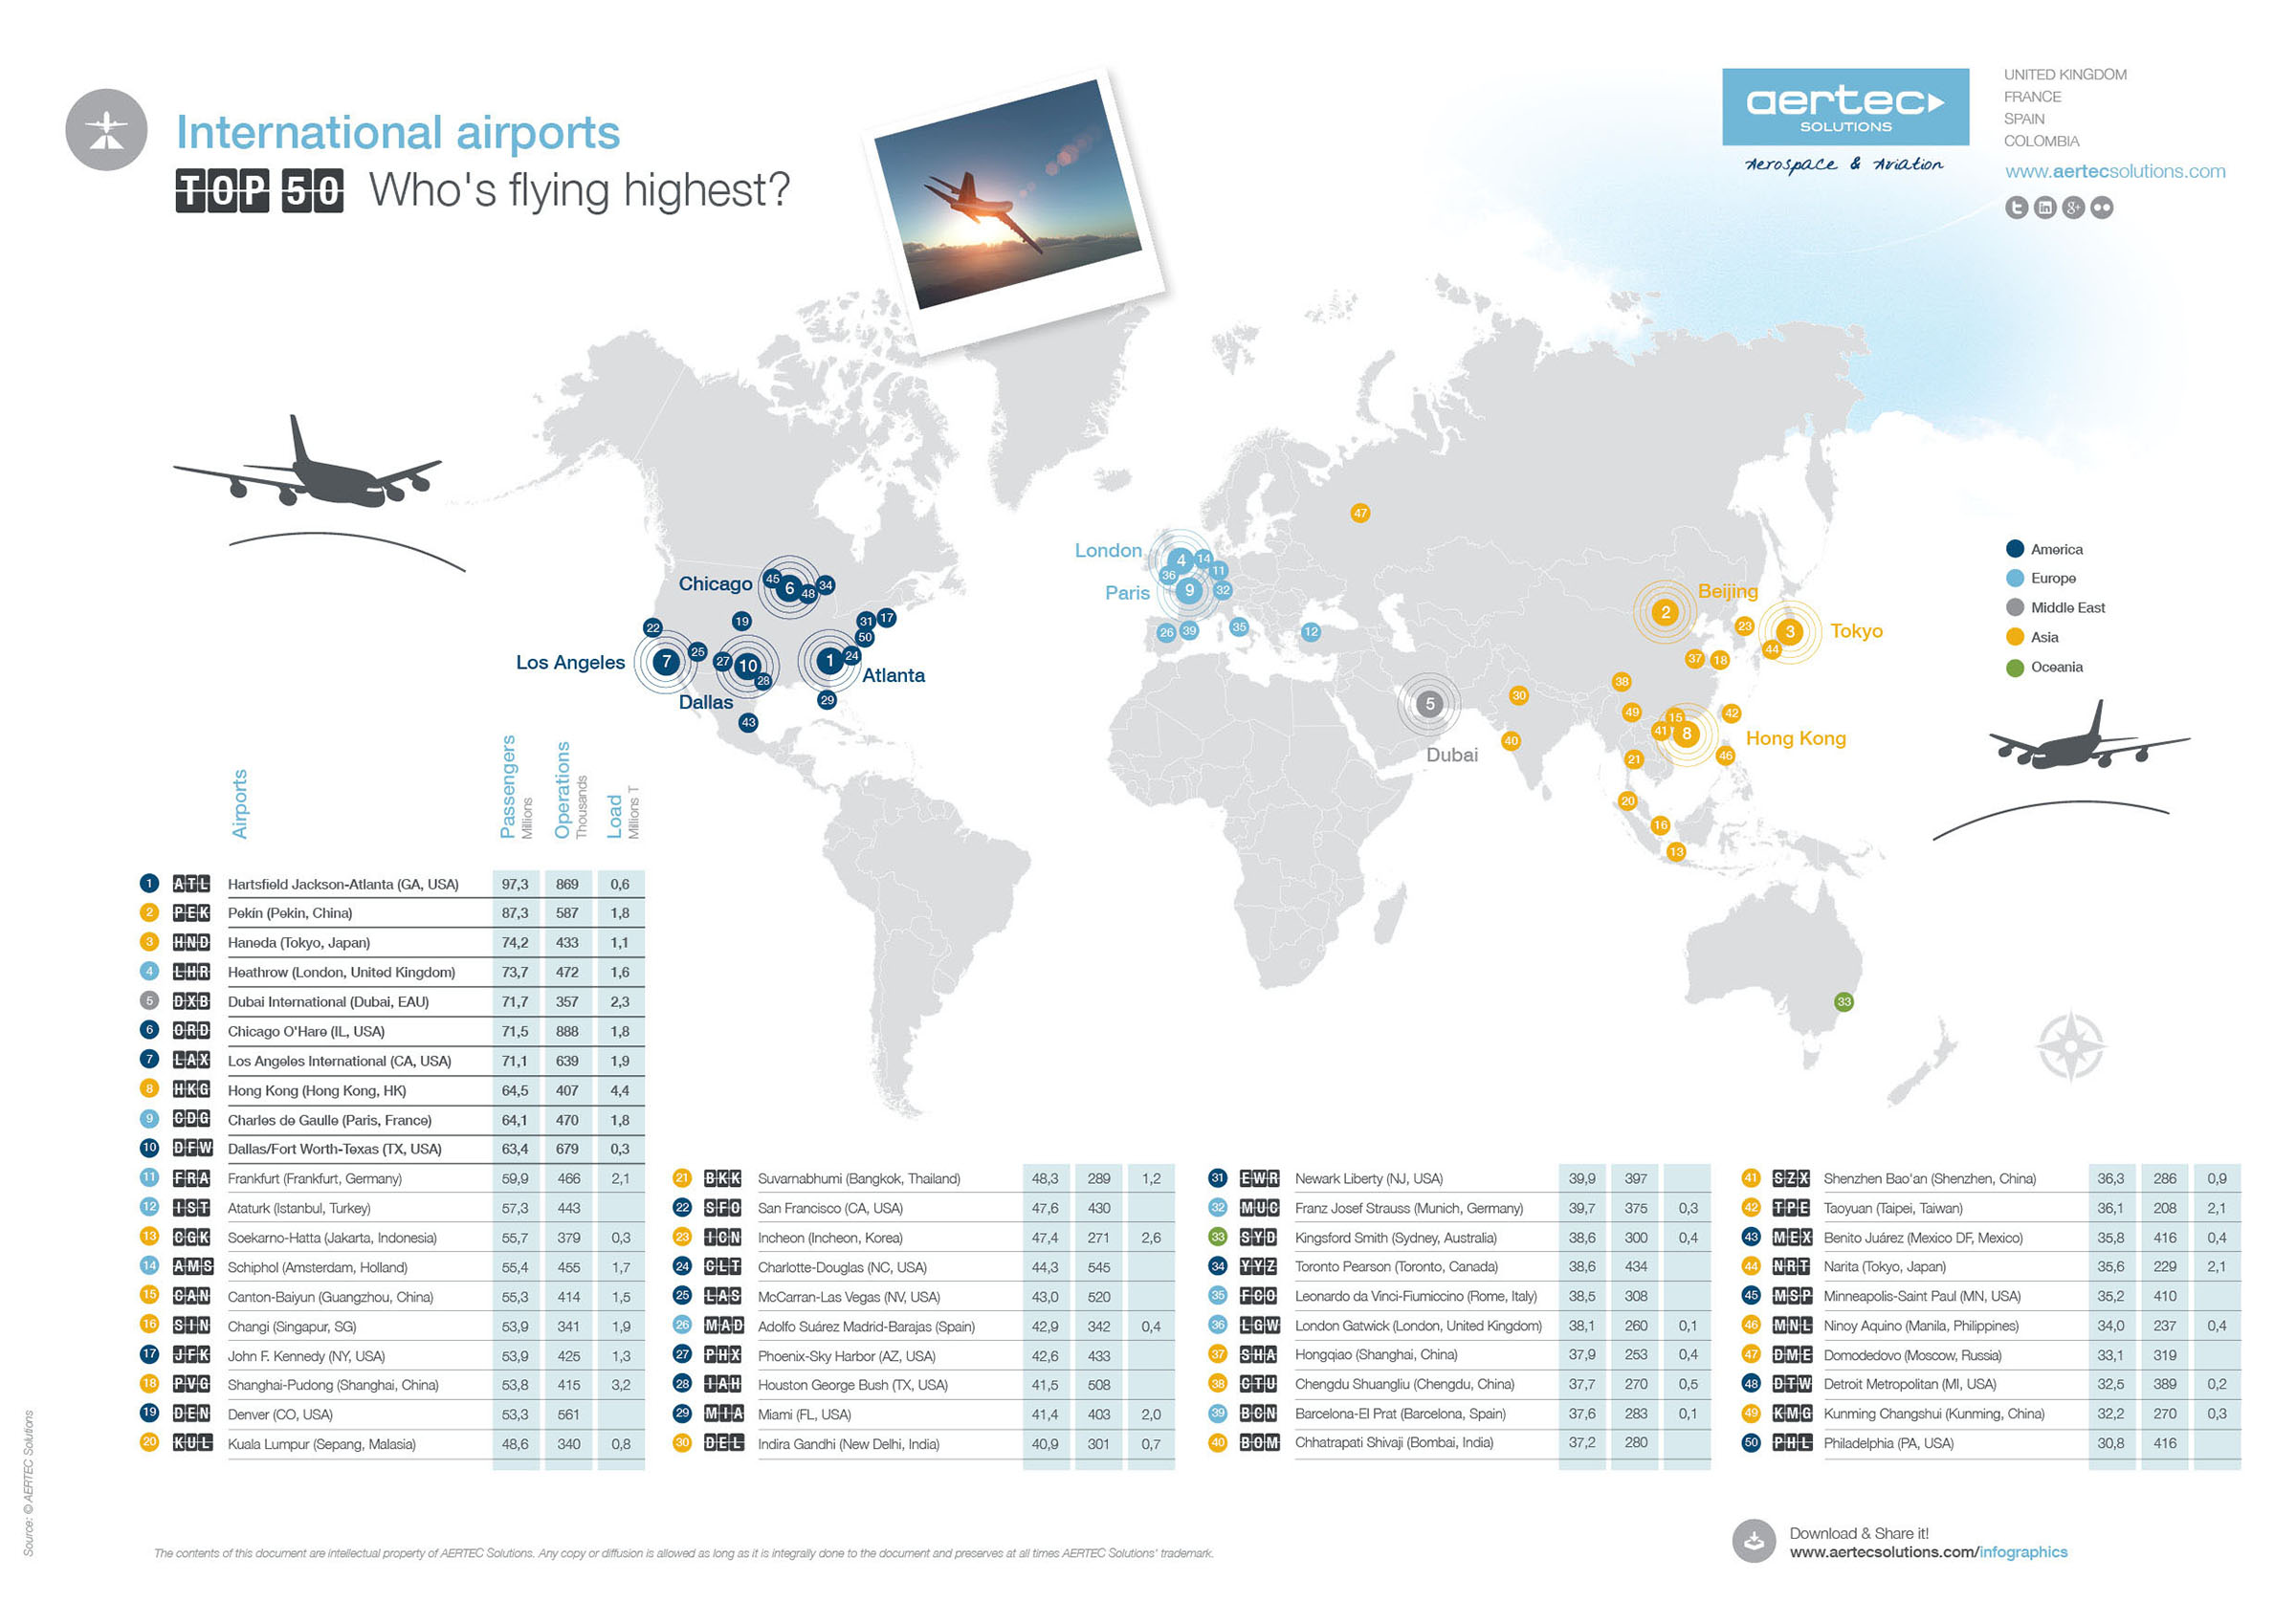 The world’s largest airports